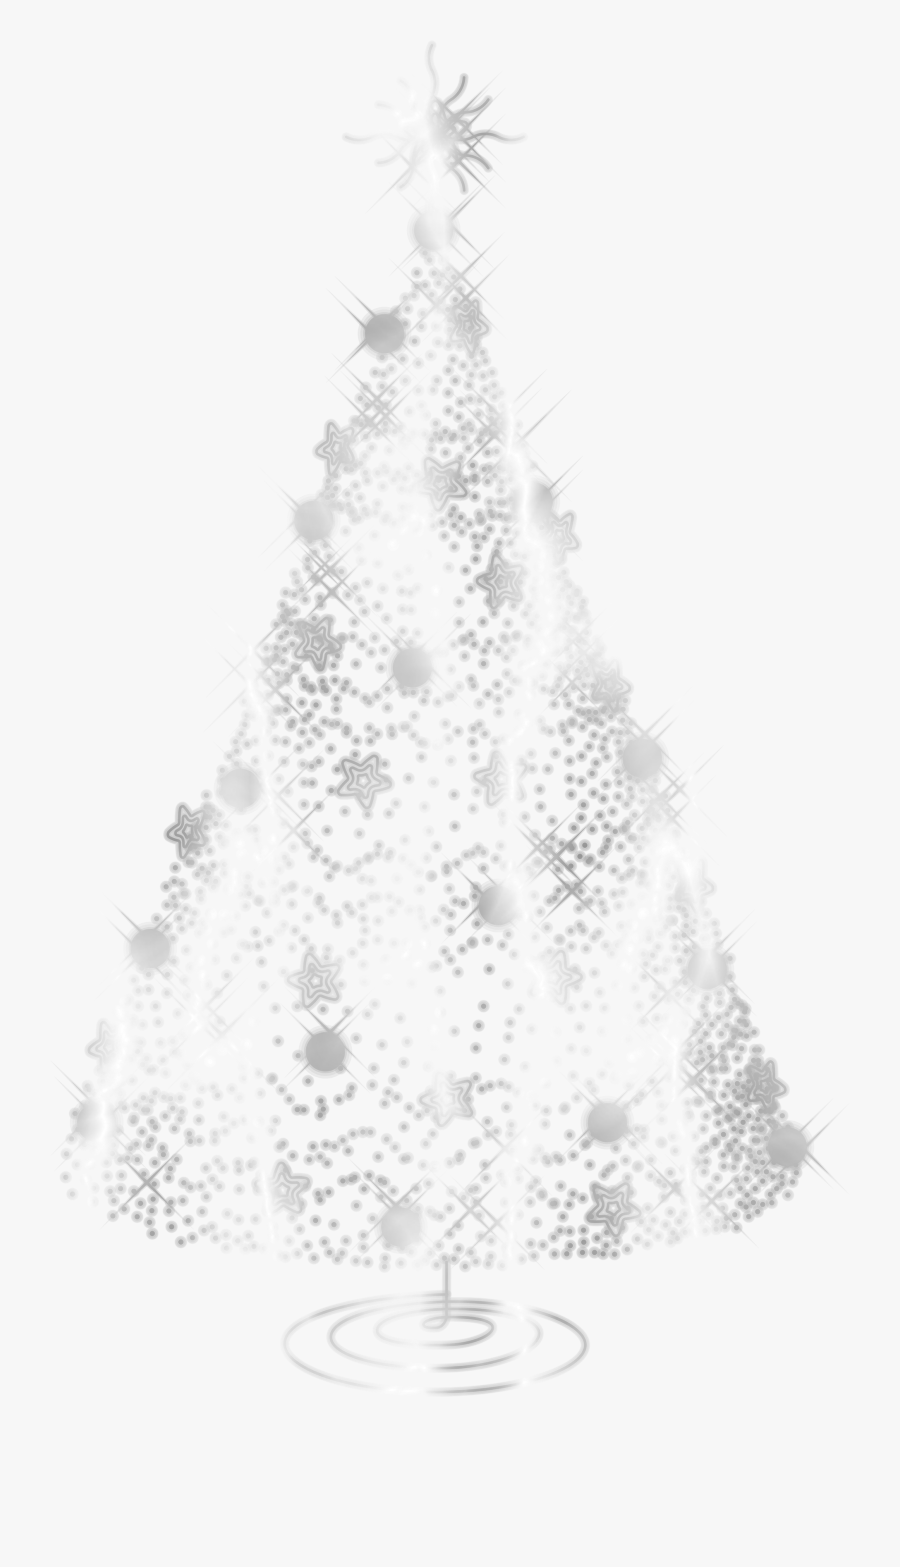 Black And White Christmas Ornament Clip Art Black And - Glittering Images Of Christmas, Transparent Clipart